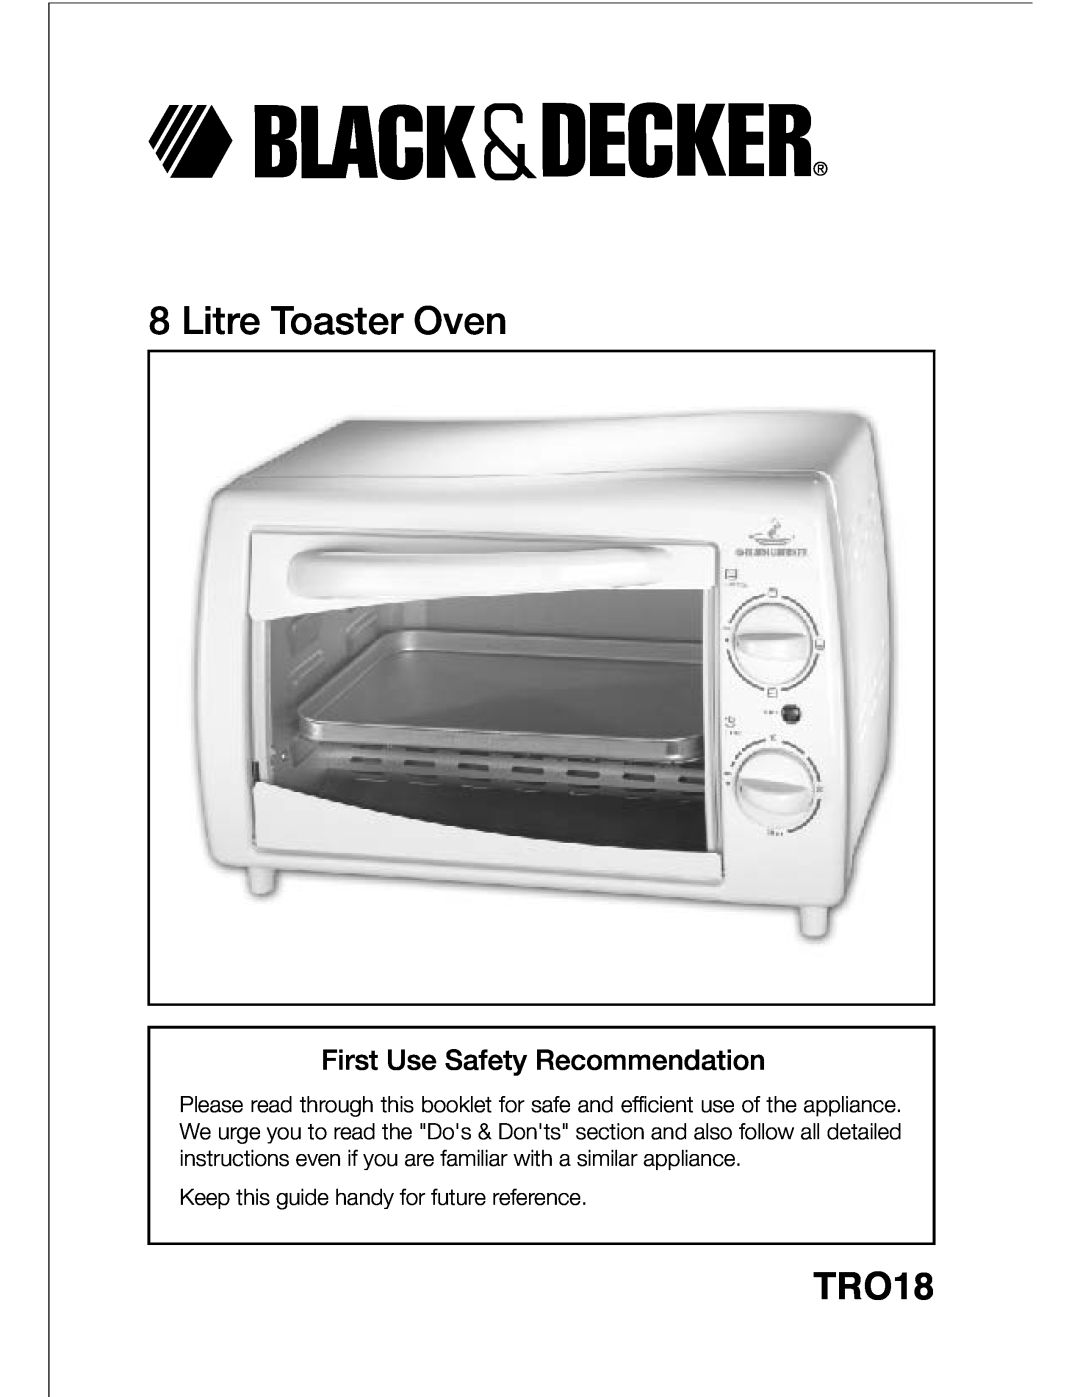 Black & Decker TRO18 manual Litre Toaster Oven, First Use Safety Recommendation 